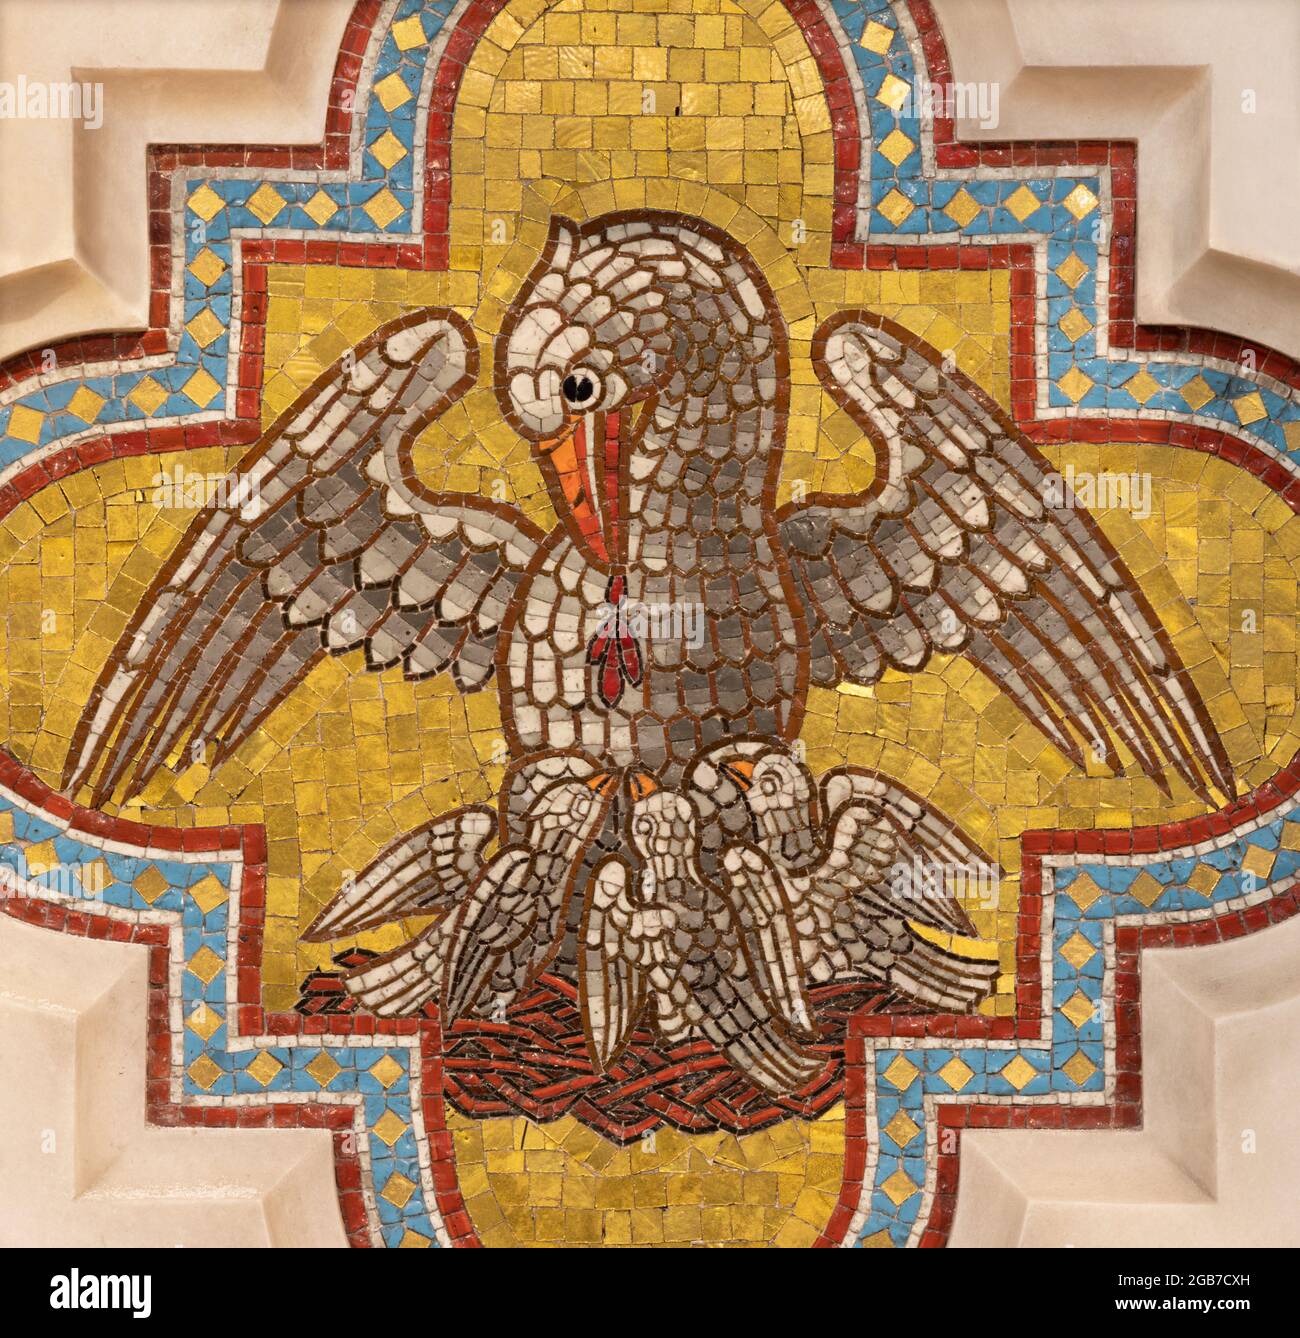 VIENNA, AUSTIRA - JUNI 24, 2021: The Pelican as the symbol of offer of Jesus on the sidealtar of Votivkirche cathedral from 19. cent. Stock Photo